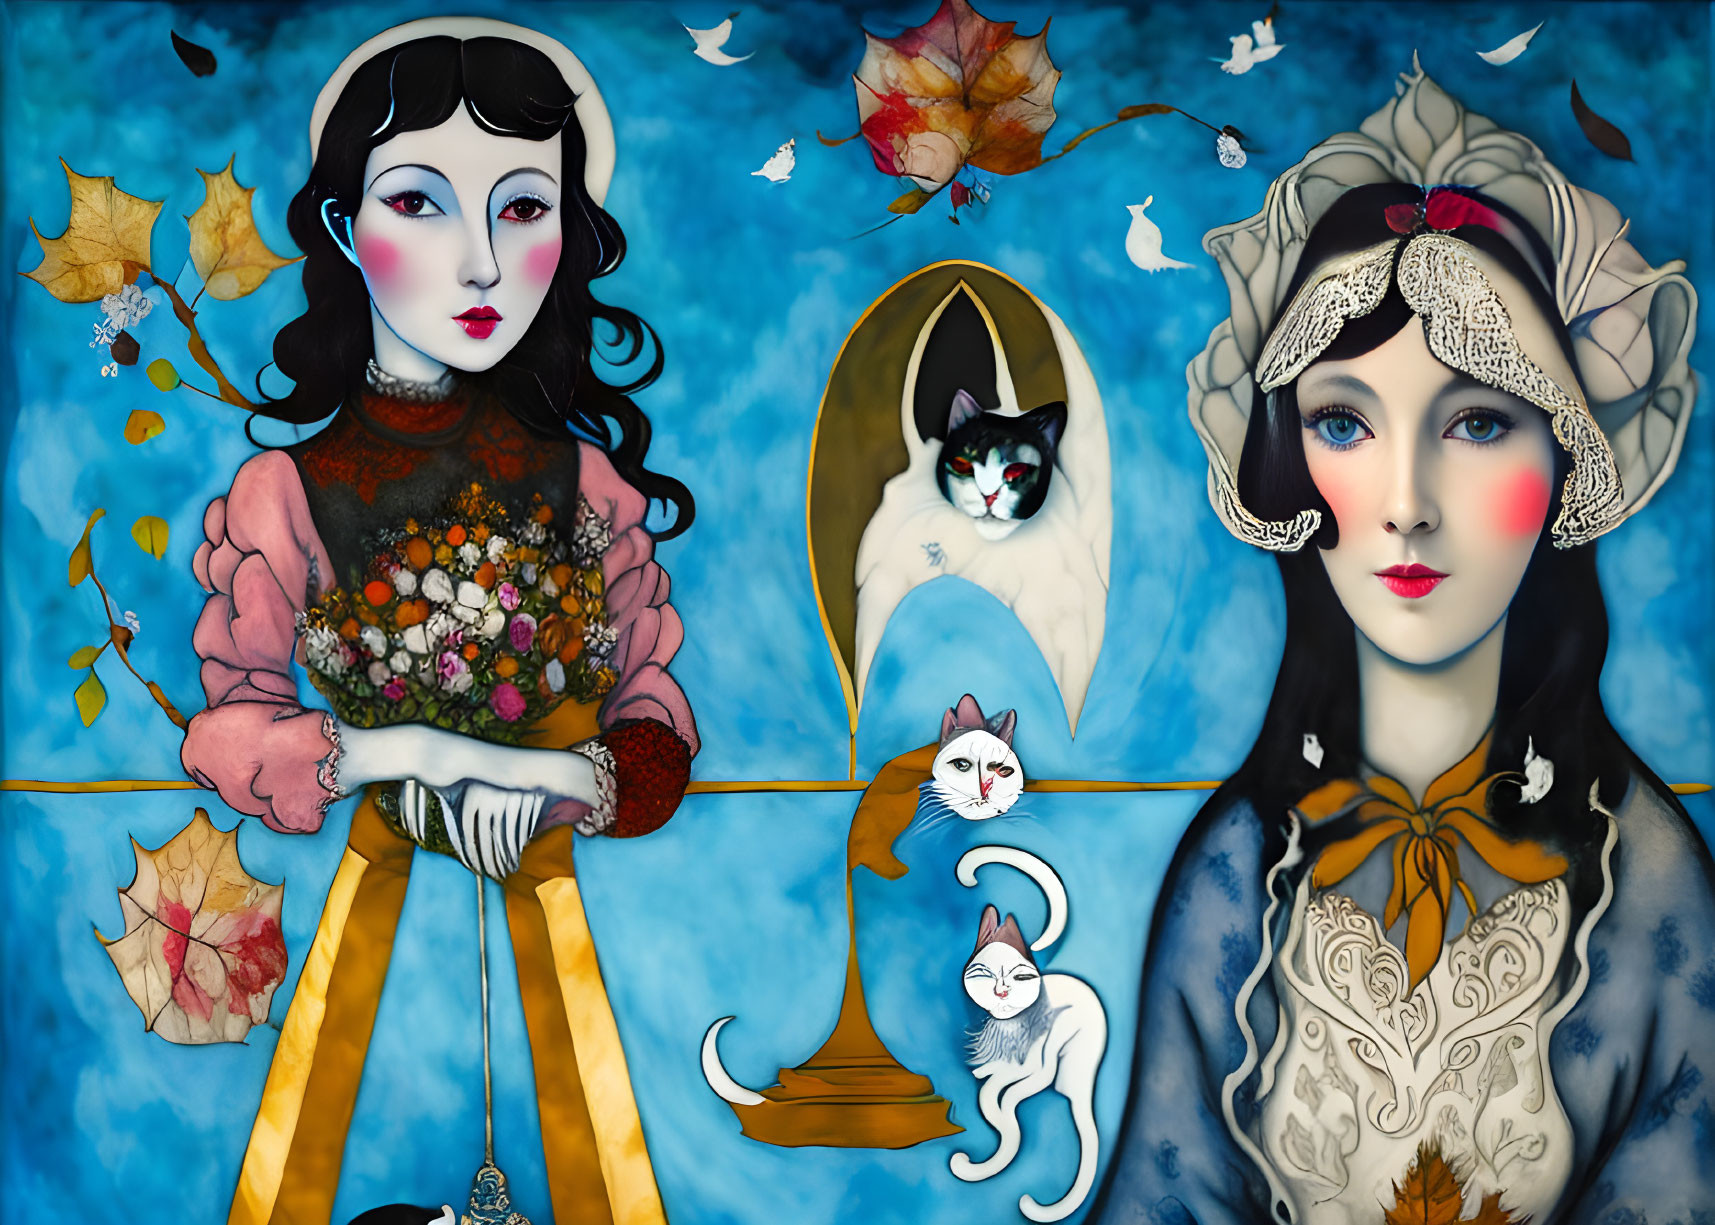 Illustrated Women with Cats and Autumn Leaves on Blue Background